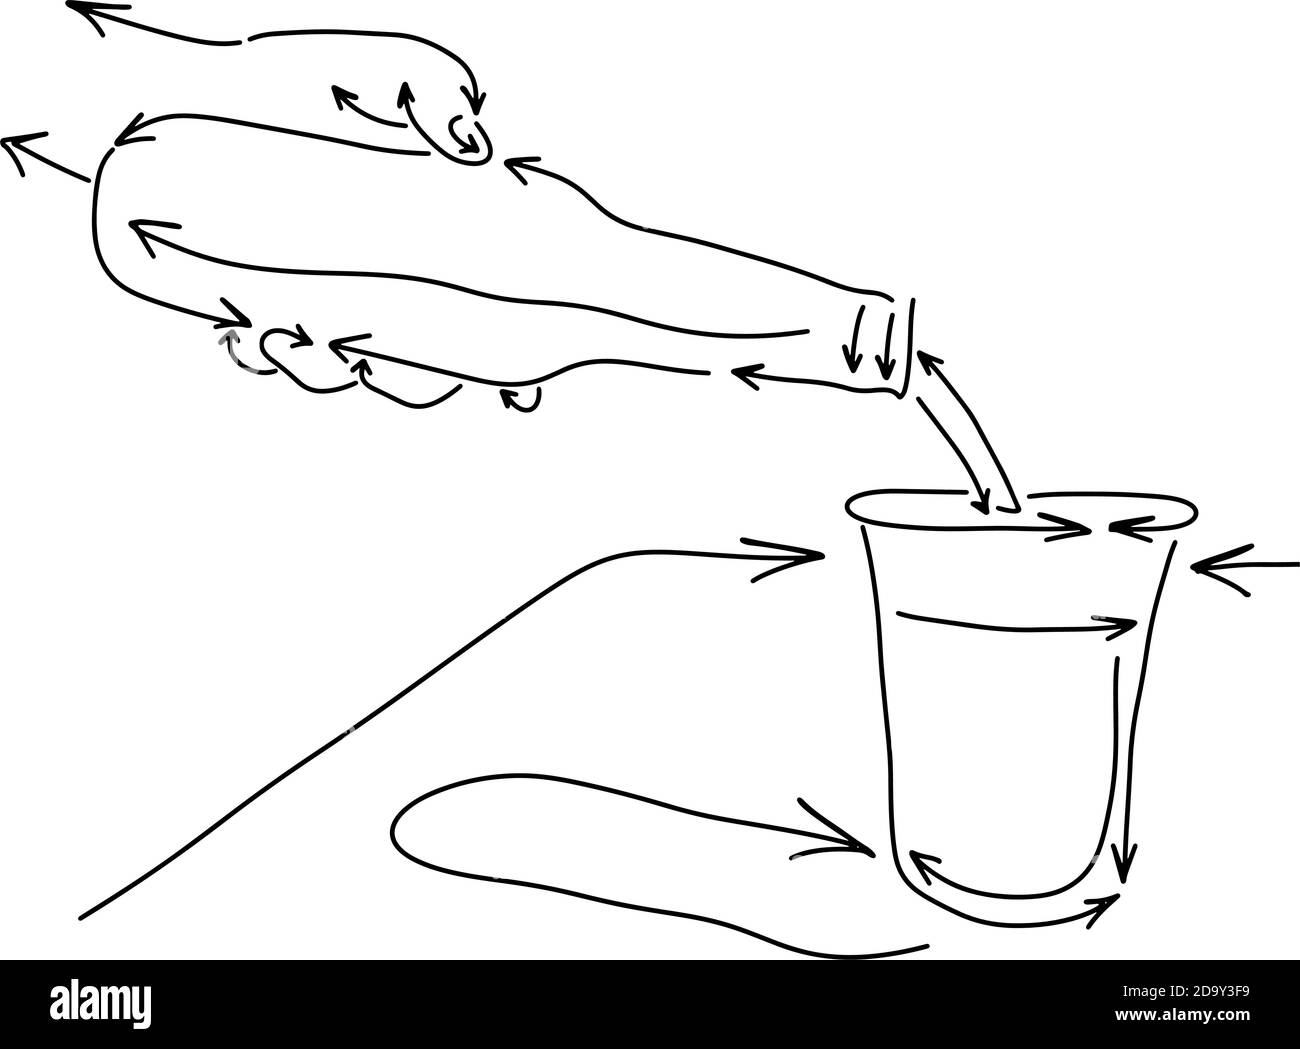 hand pouring water from bottle on glass made from arrow vector illustration sketch doodle hand drawn with black lines isolated on white background Stock Vector